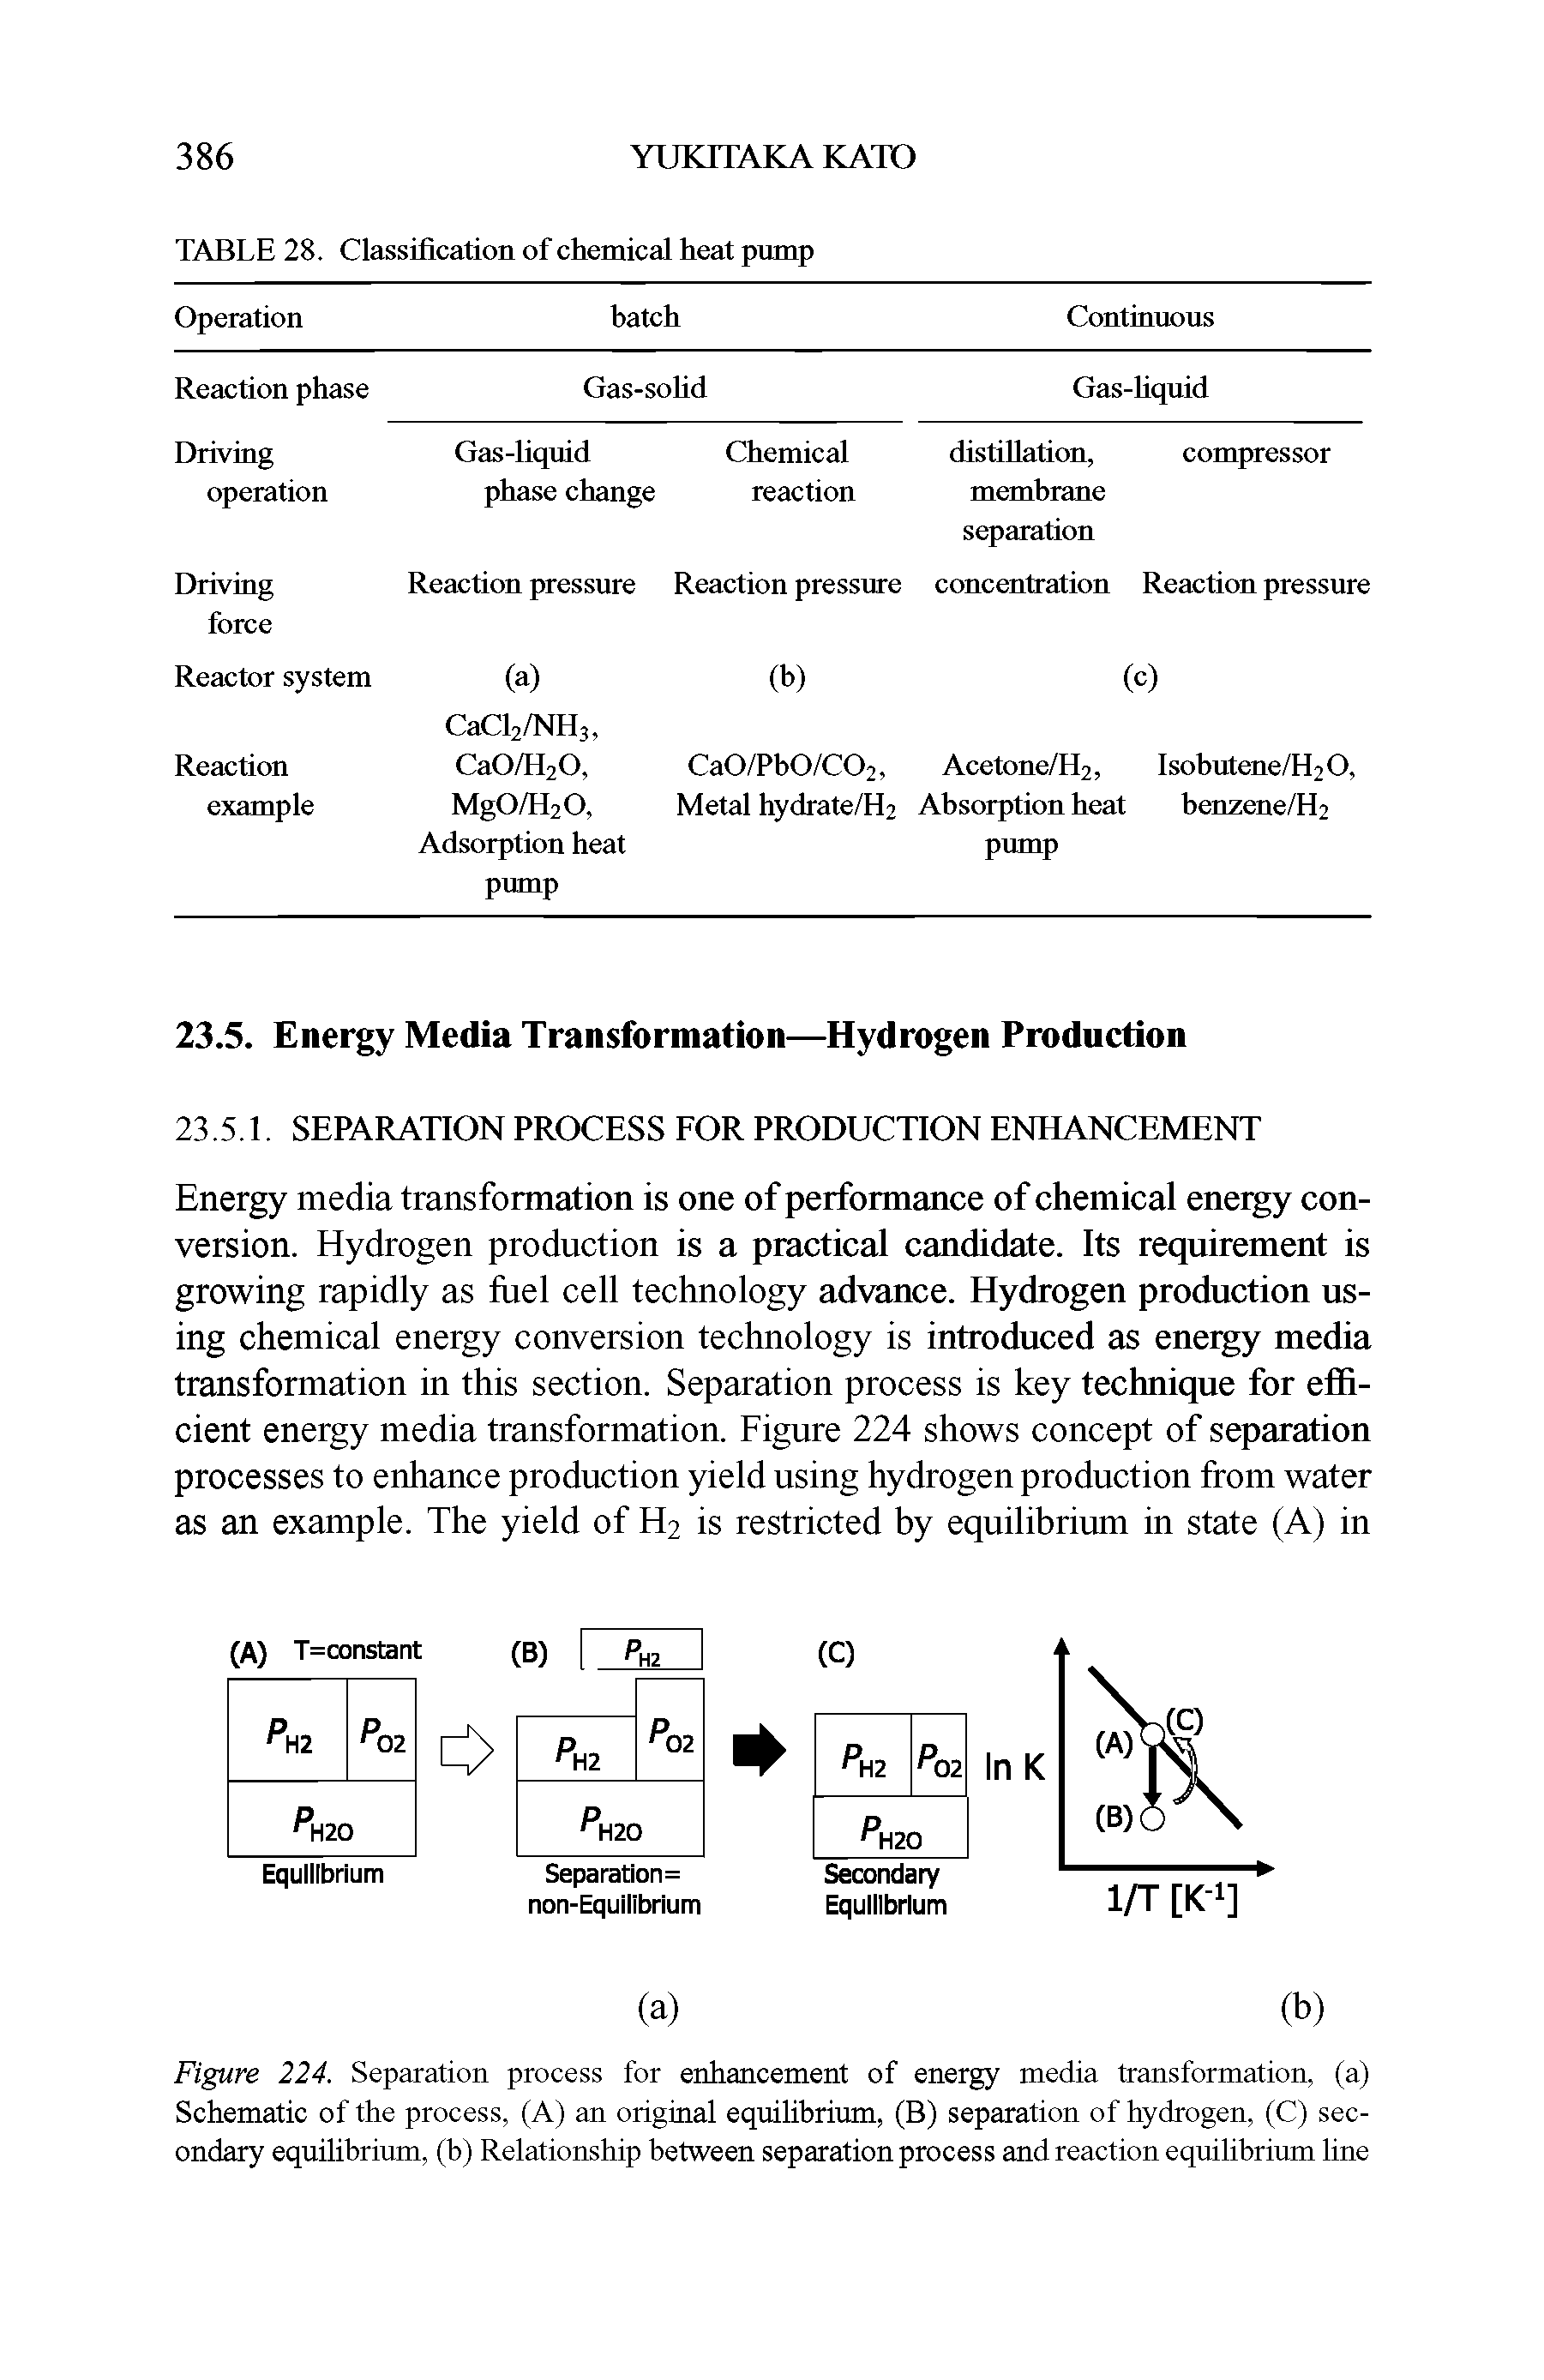 Figure 224. Separation process for enhancement of energy media transformation, (a) Schematic of the process, (A) an original equilibrium, (B) separation of hydrogen, (C) secondary equilibrium, (b) Relationship between separation process and reaction equilibrium line...